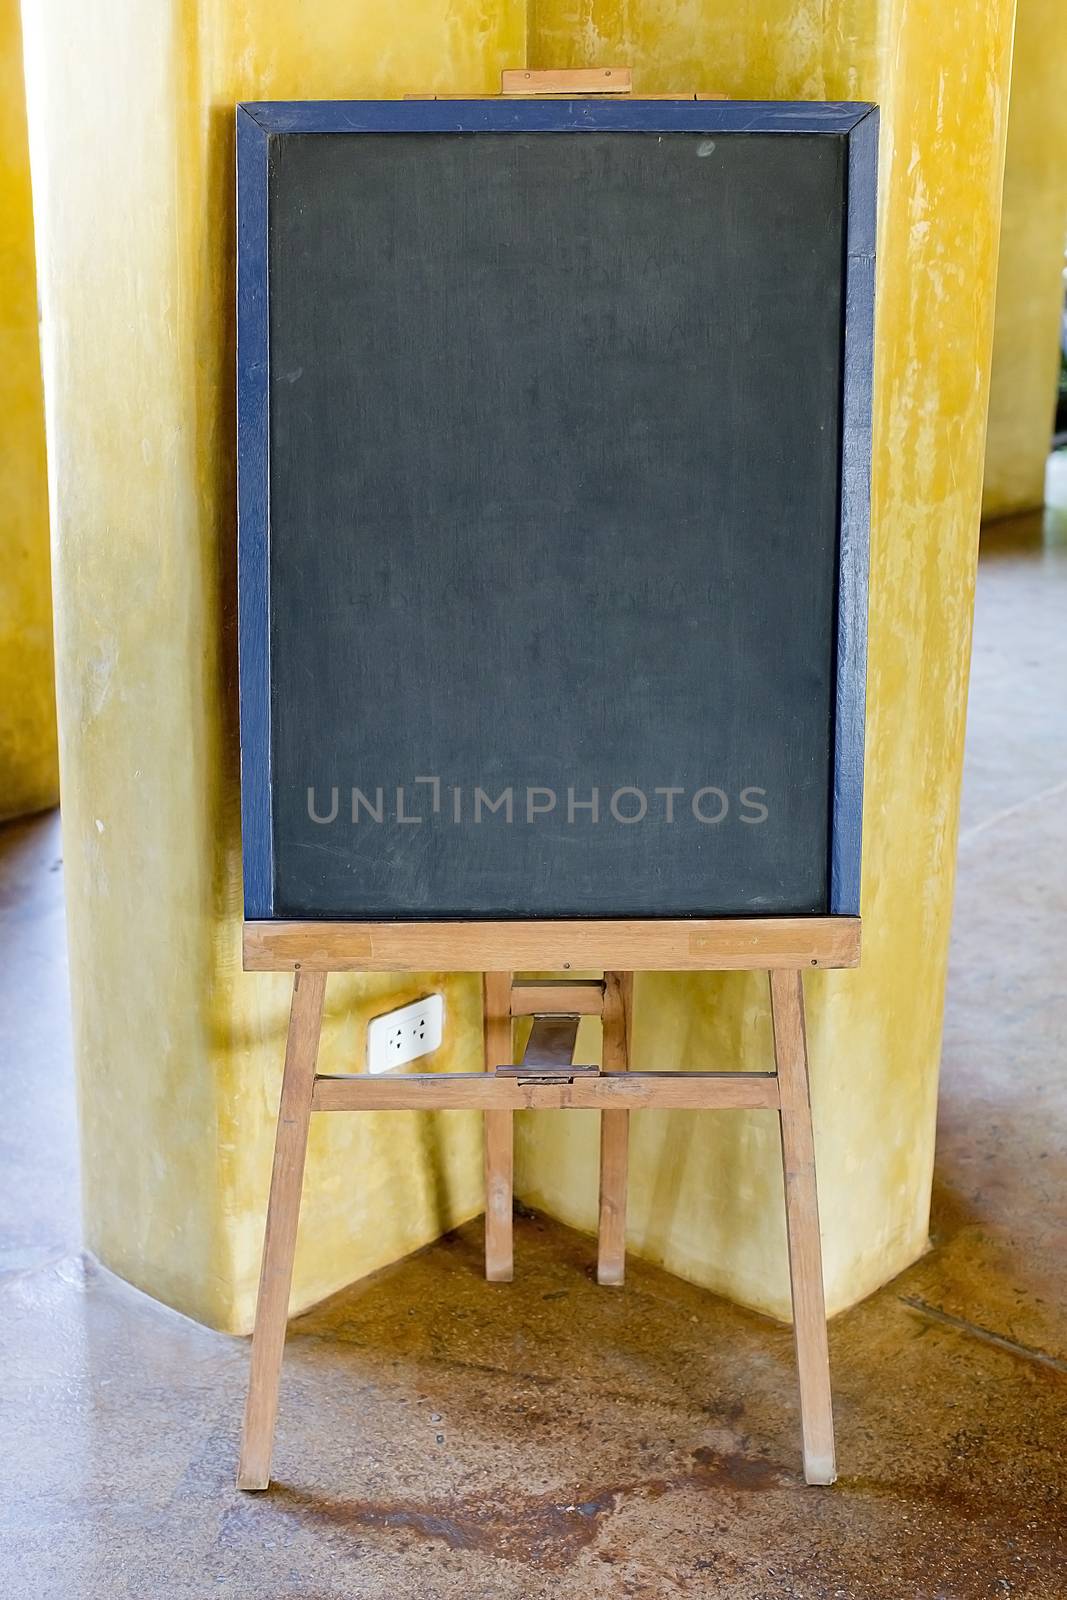 Blank menu chalkboard in wooden frame (Save Paths For design wor by art9858